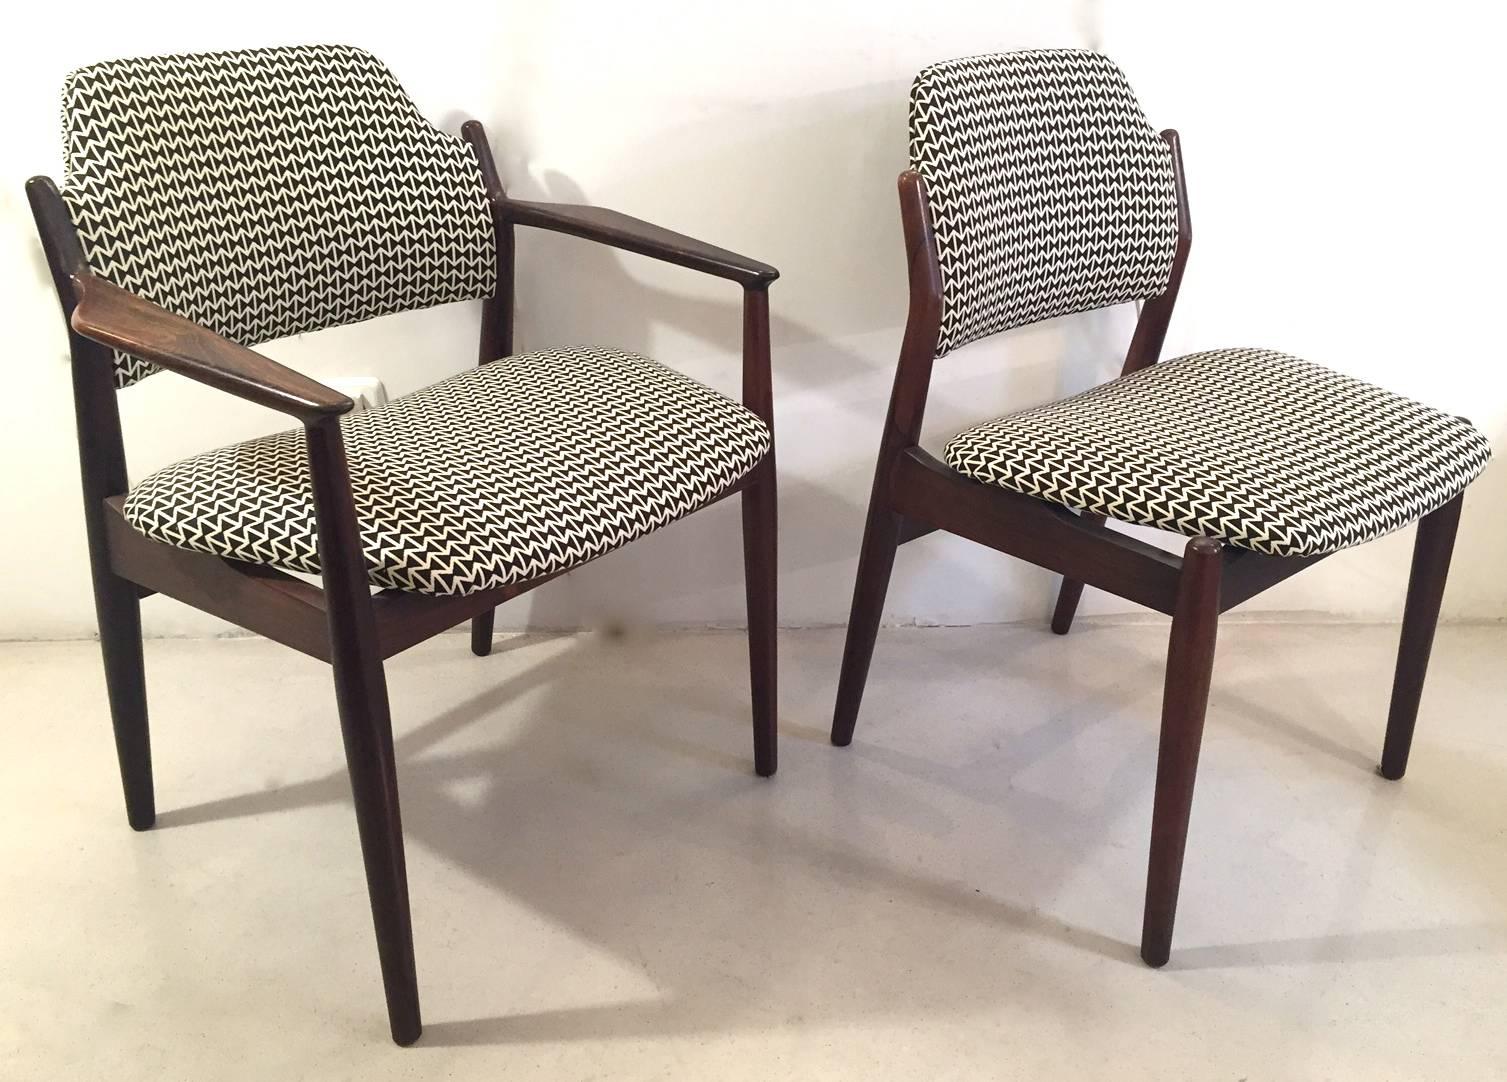 An outstanding set of four 1960s Rio rosewood chairs. Two armchairs and two single chairs. Designed by Arne Vodder and edited in the 1960s by Silbast Mobler. The chairs have been reupholstered in Kvadrat Double Triangle Maharam.
Excellent condition.